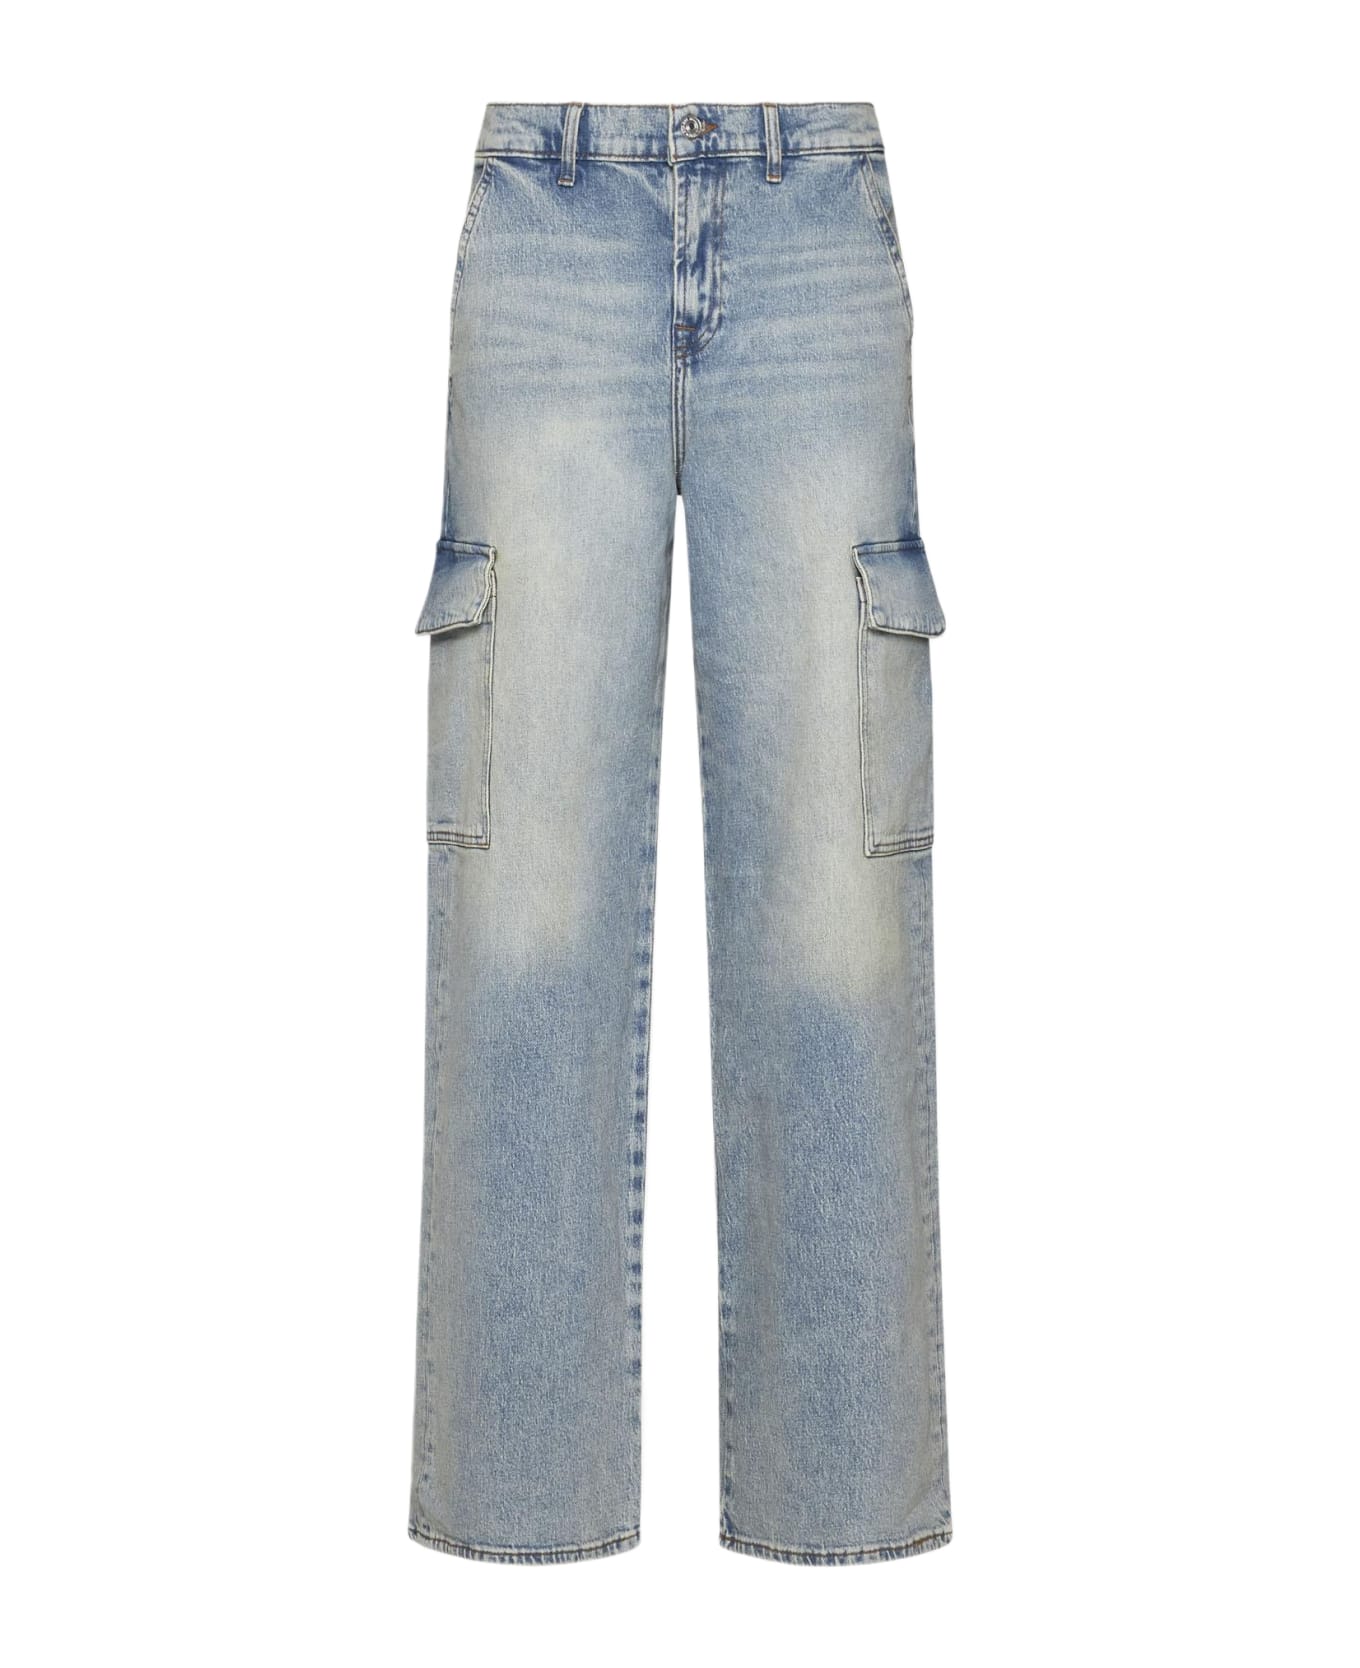 7 For All Mankind Cargo Scout Frost Jeans - Clear Blue